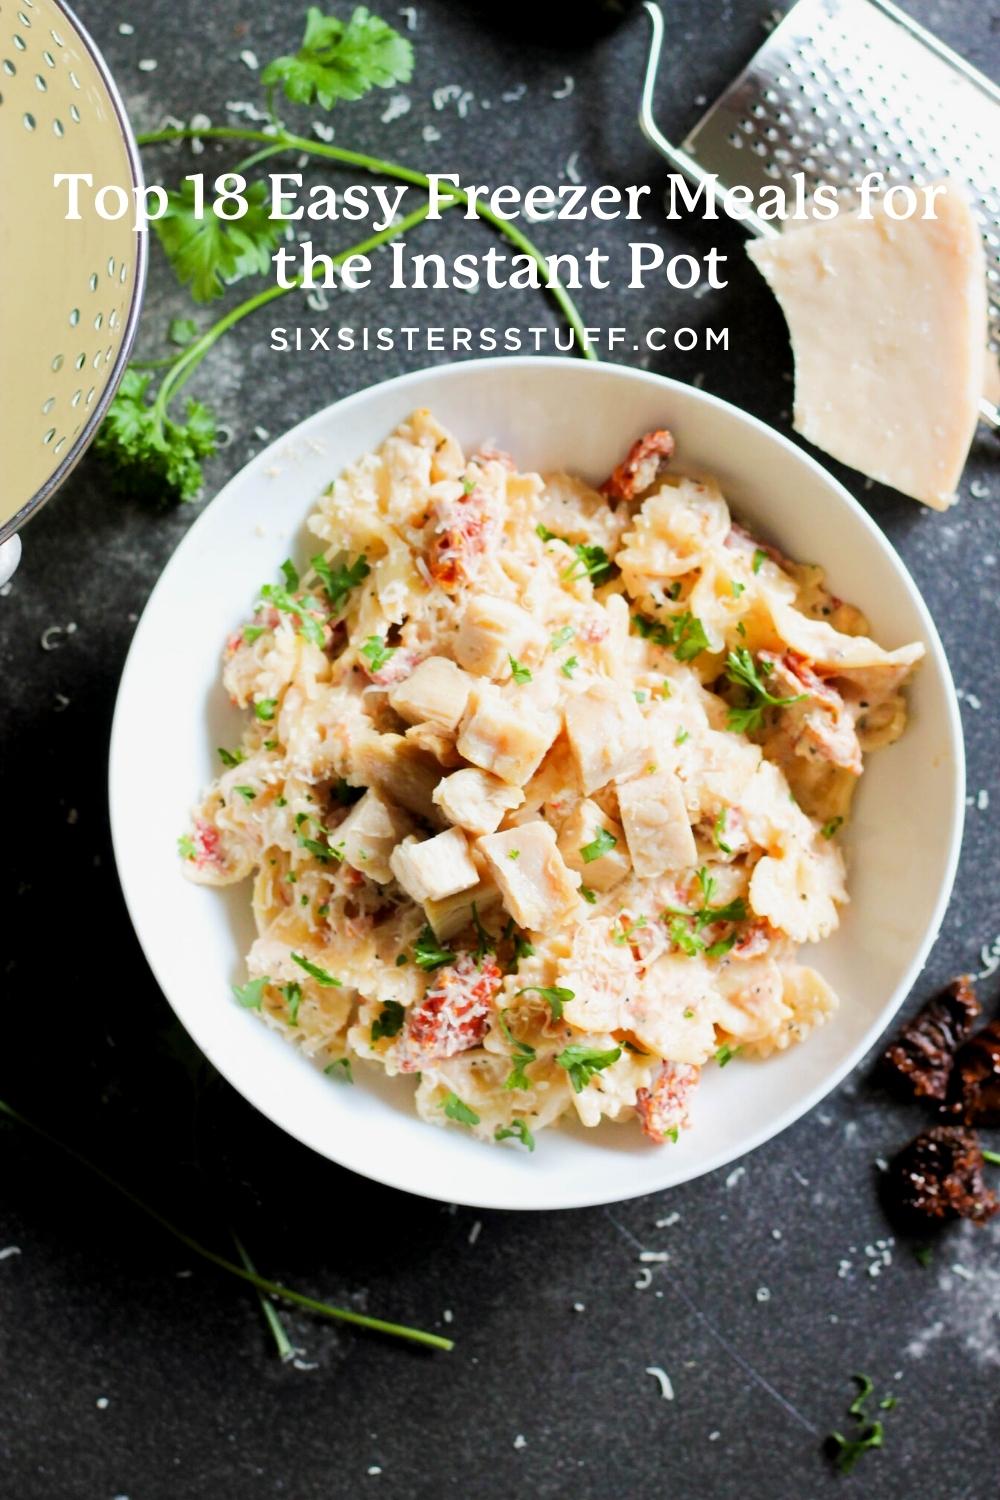 Top 18 Easy Freezer Meals for the Instant Pot